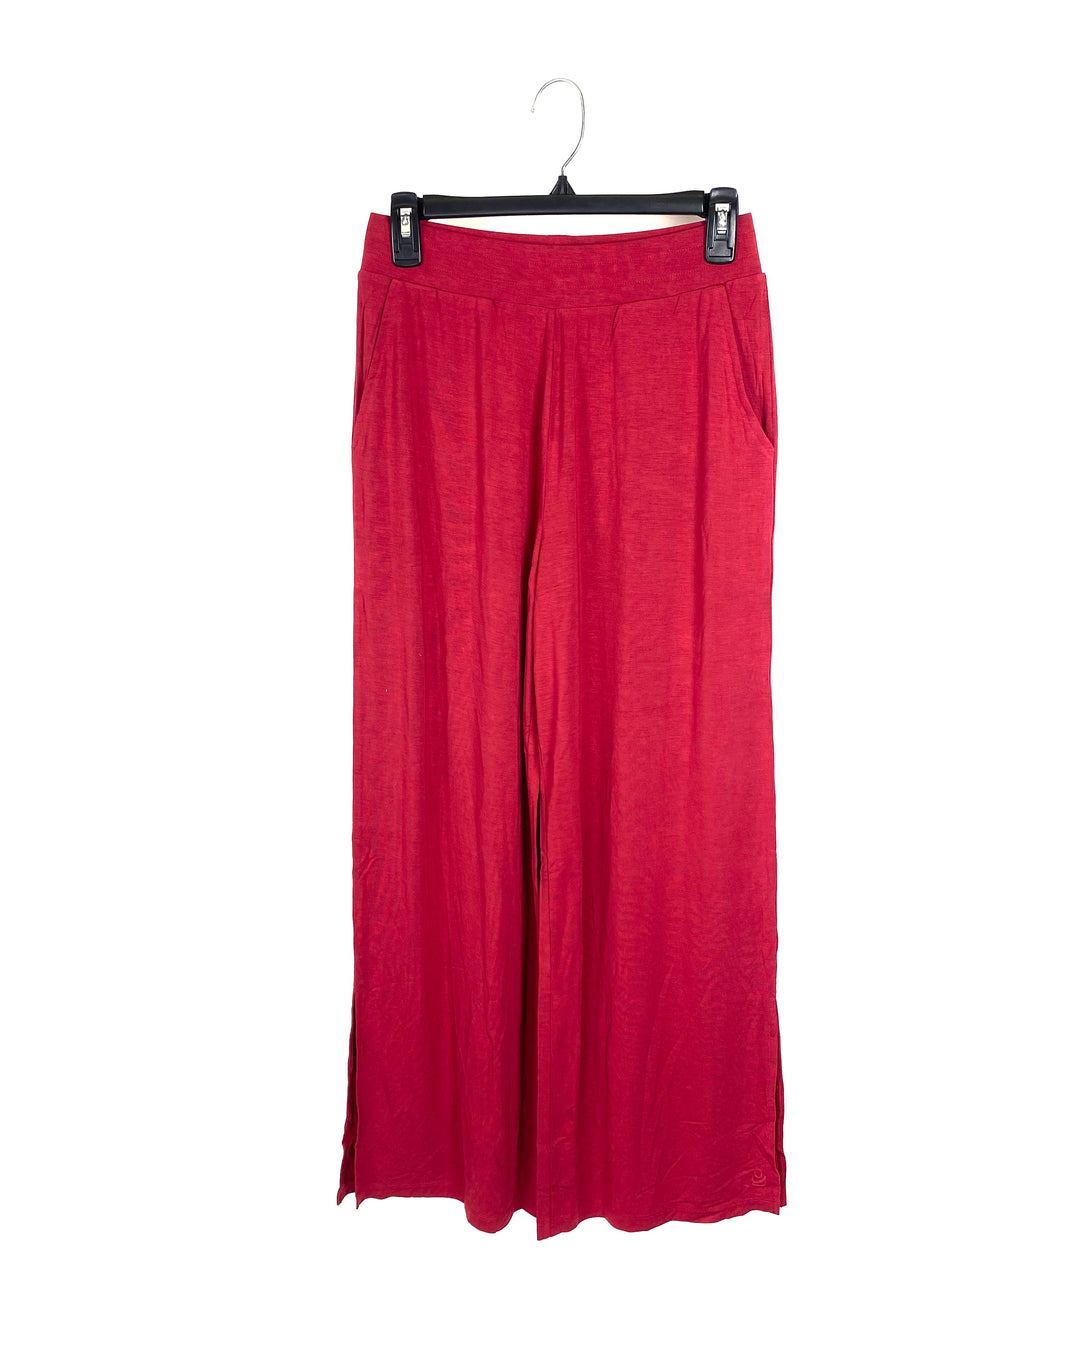 Red Sweatpants - Extra Small and Small